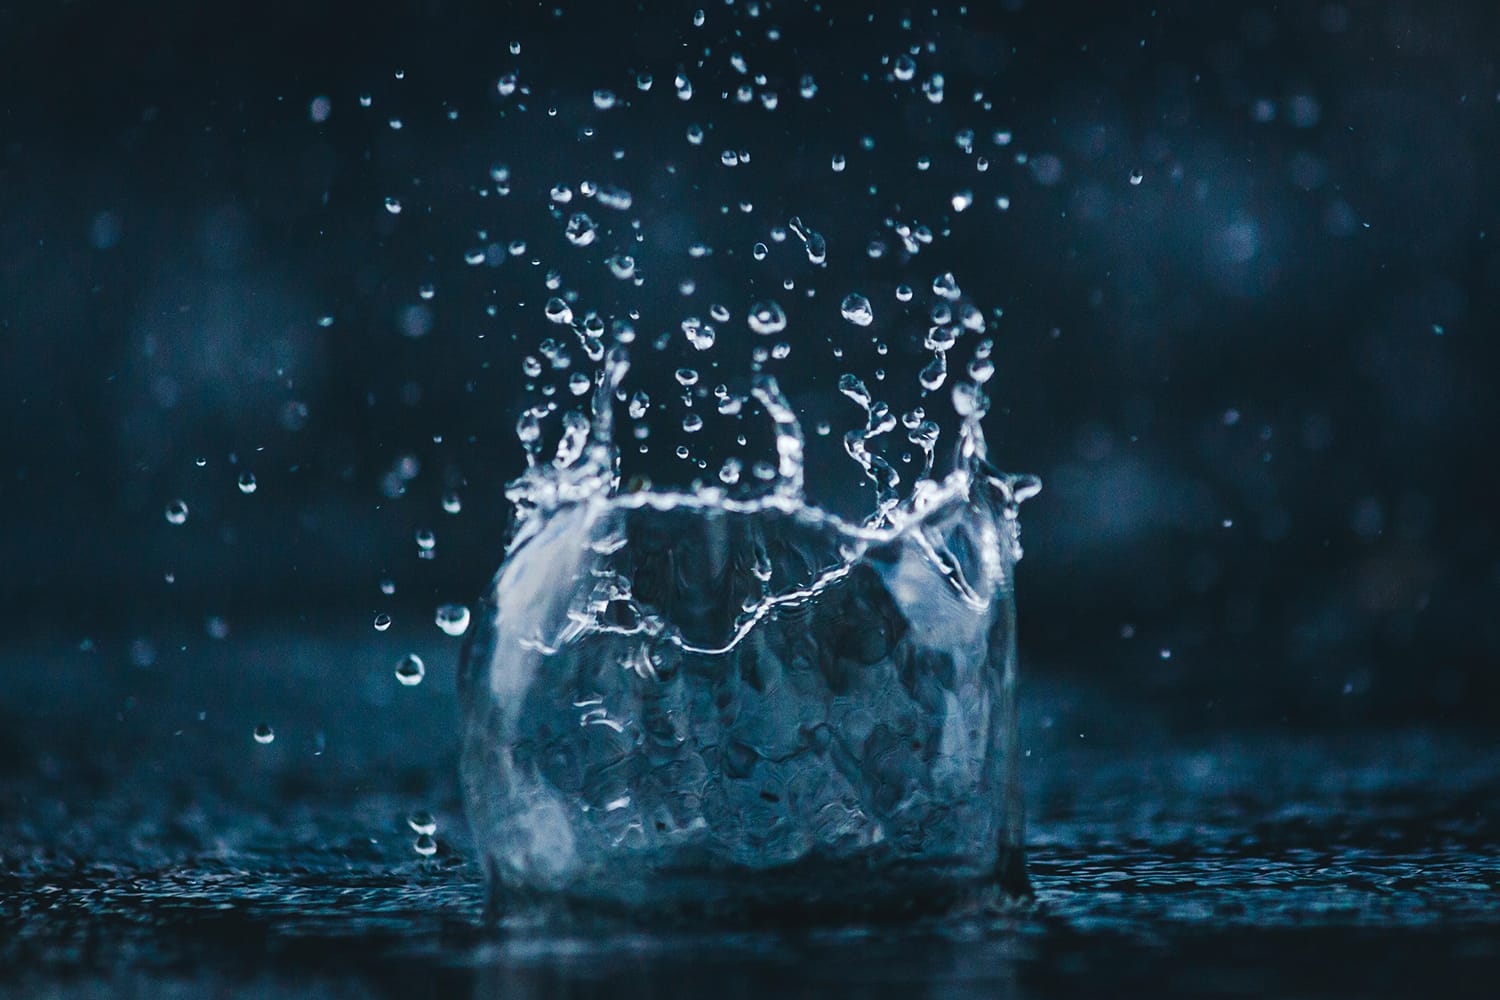 An Introduction to Splash Water Photography: 10 Tips for Stunning Images